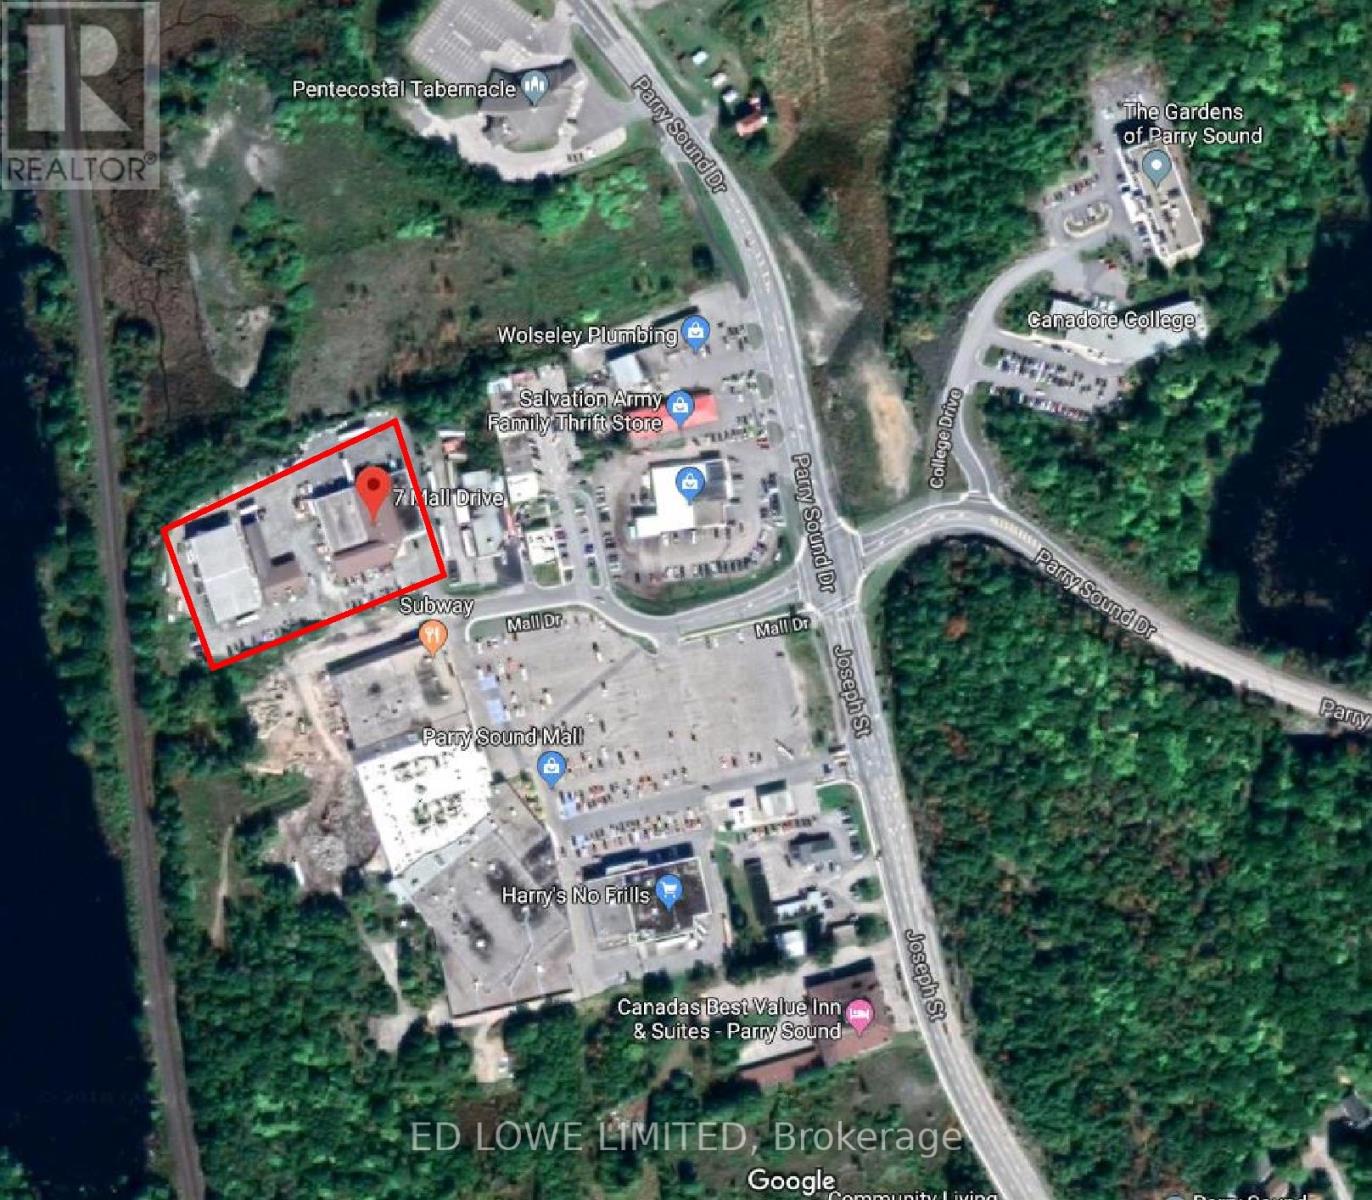 7 MALL DRIVE, parry sound, Ontario